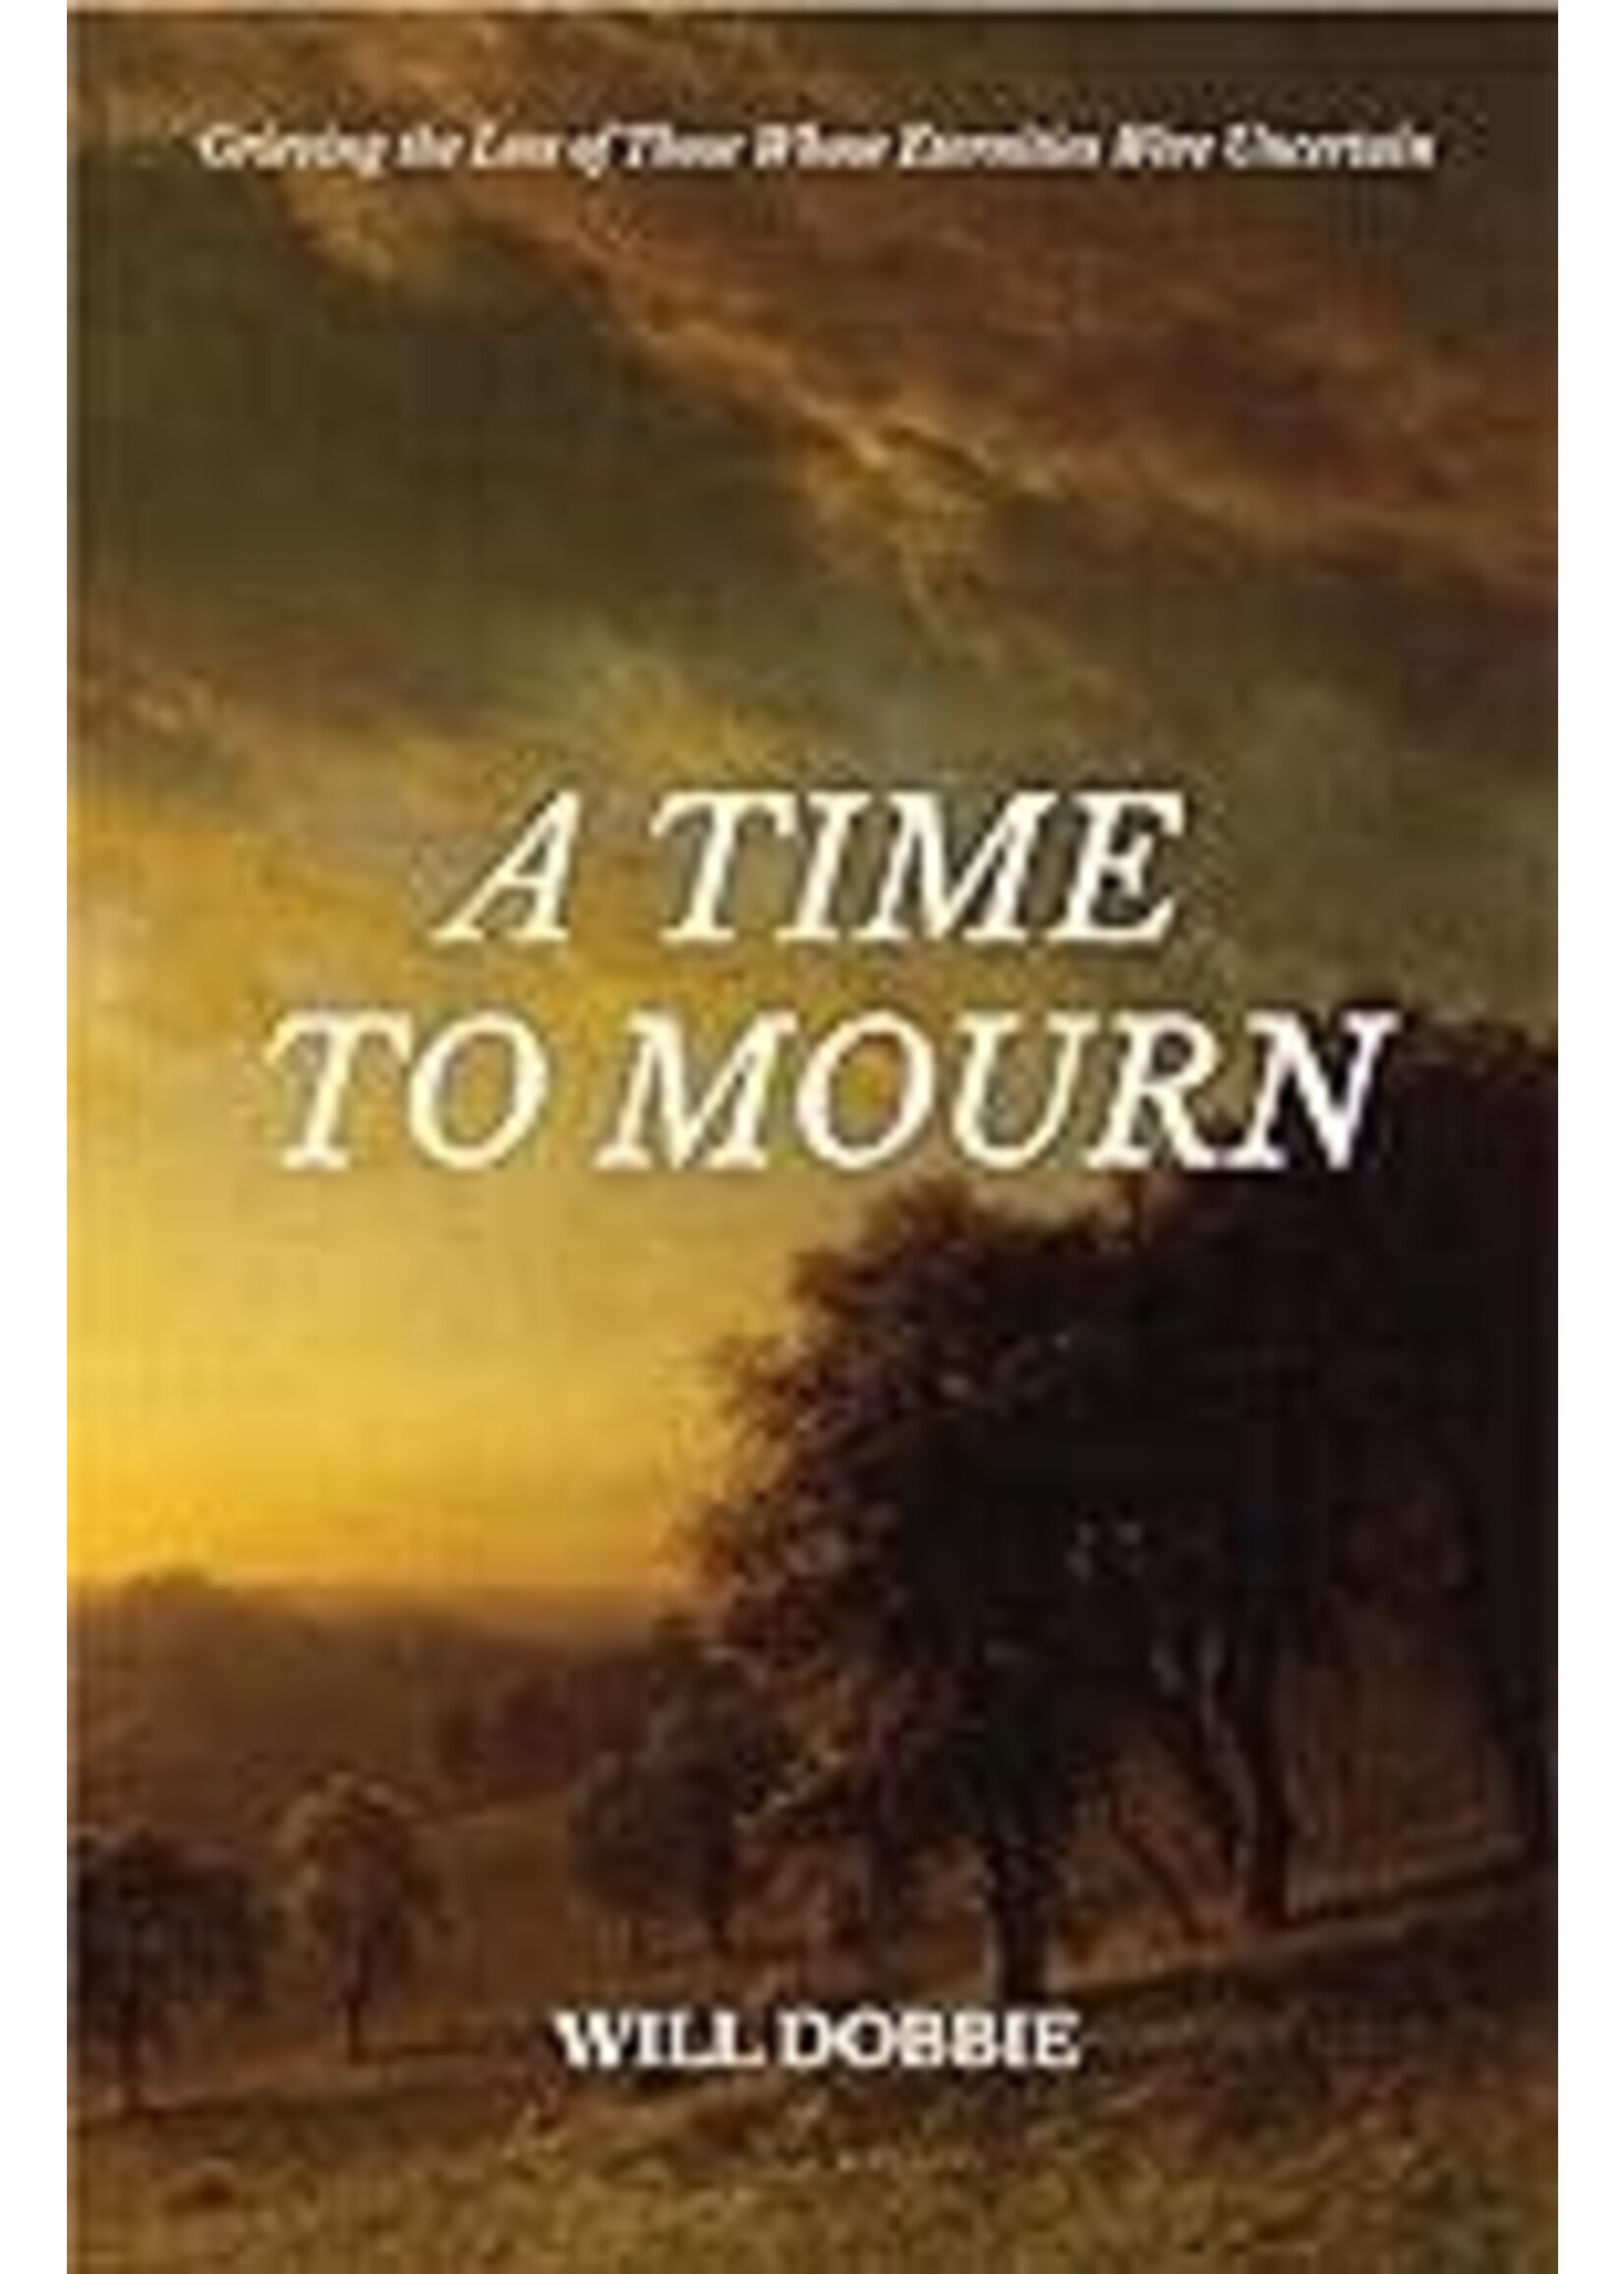 A Time to Mourn